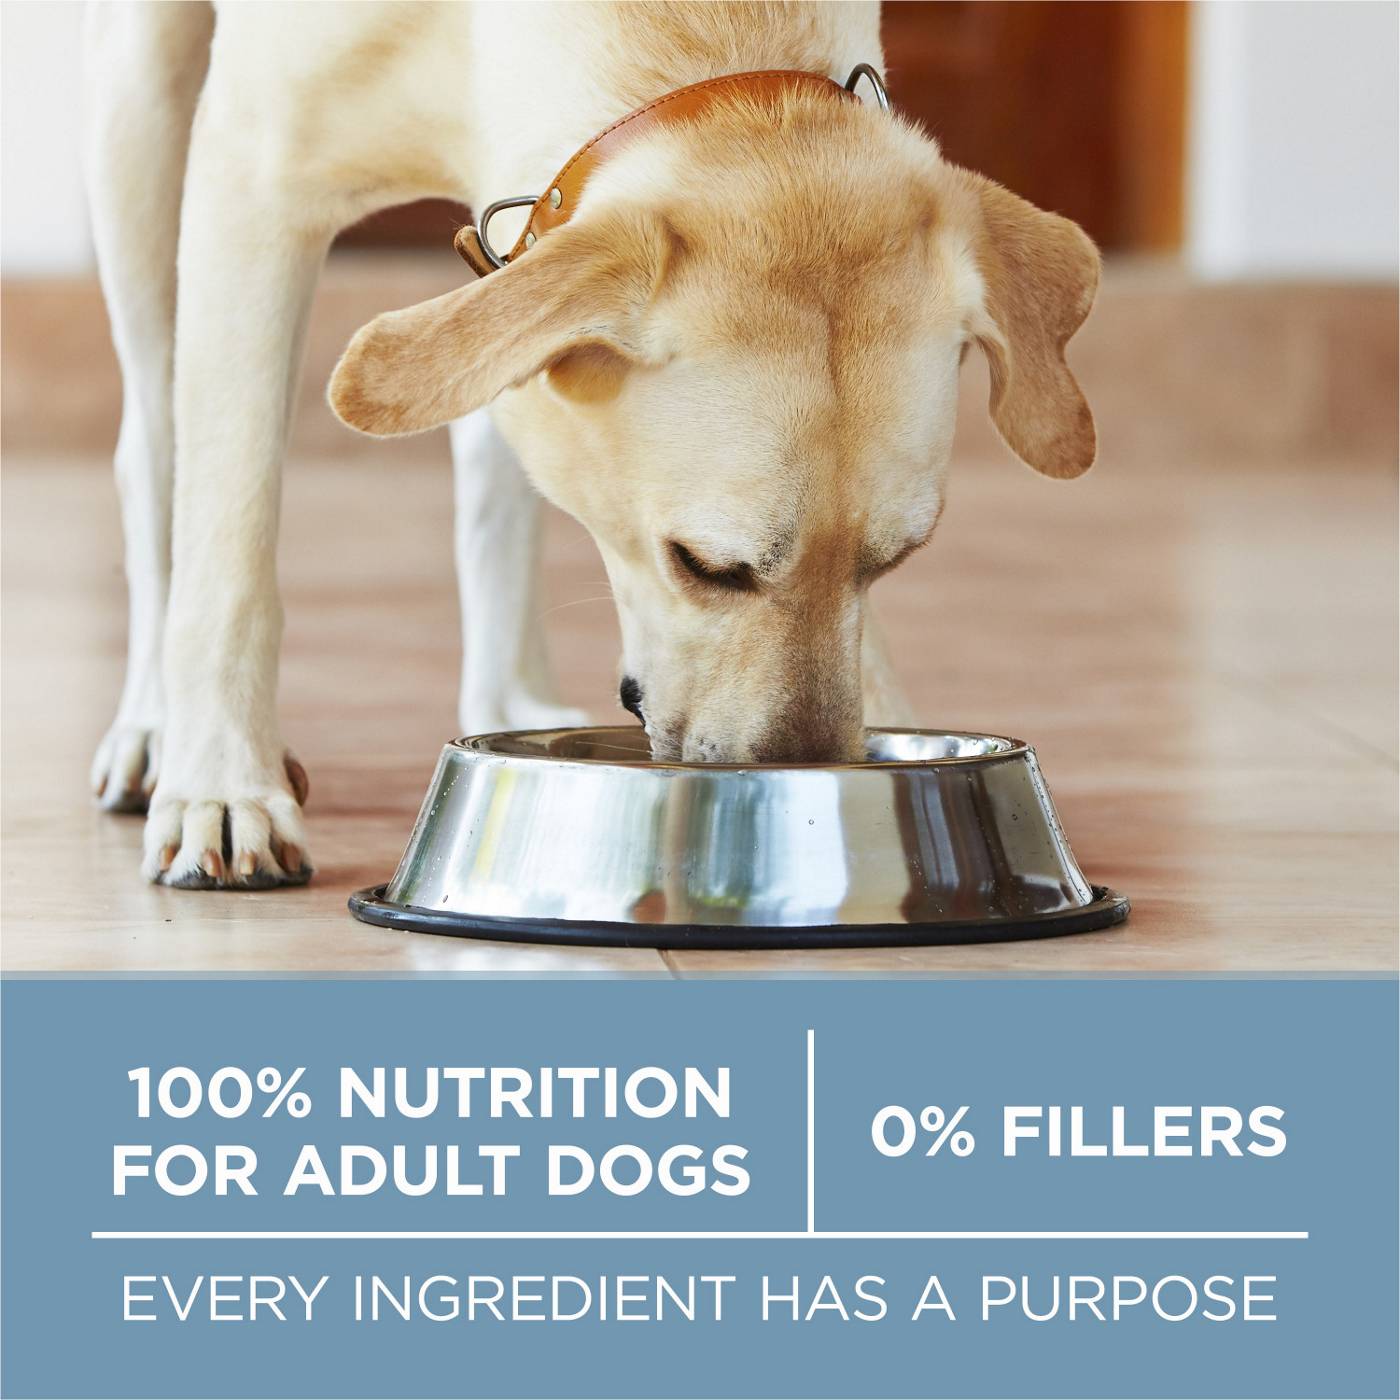 Purina ONE Purina ONE Plus Joint Health Formula Natural With Added Vitamins, Minerals and Nutrients Dry Dog Food; image 3 of 6